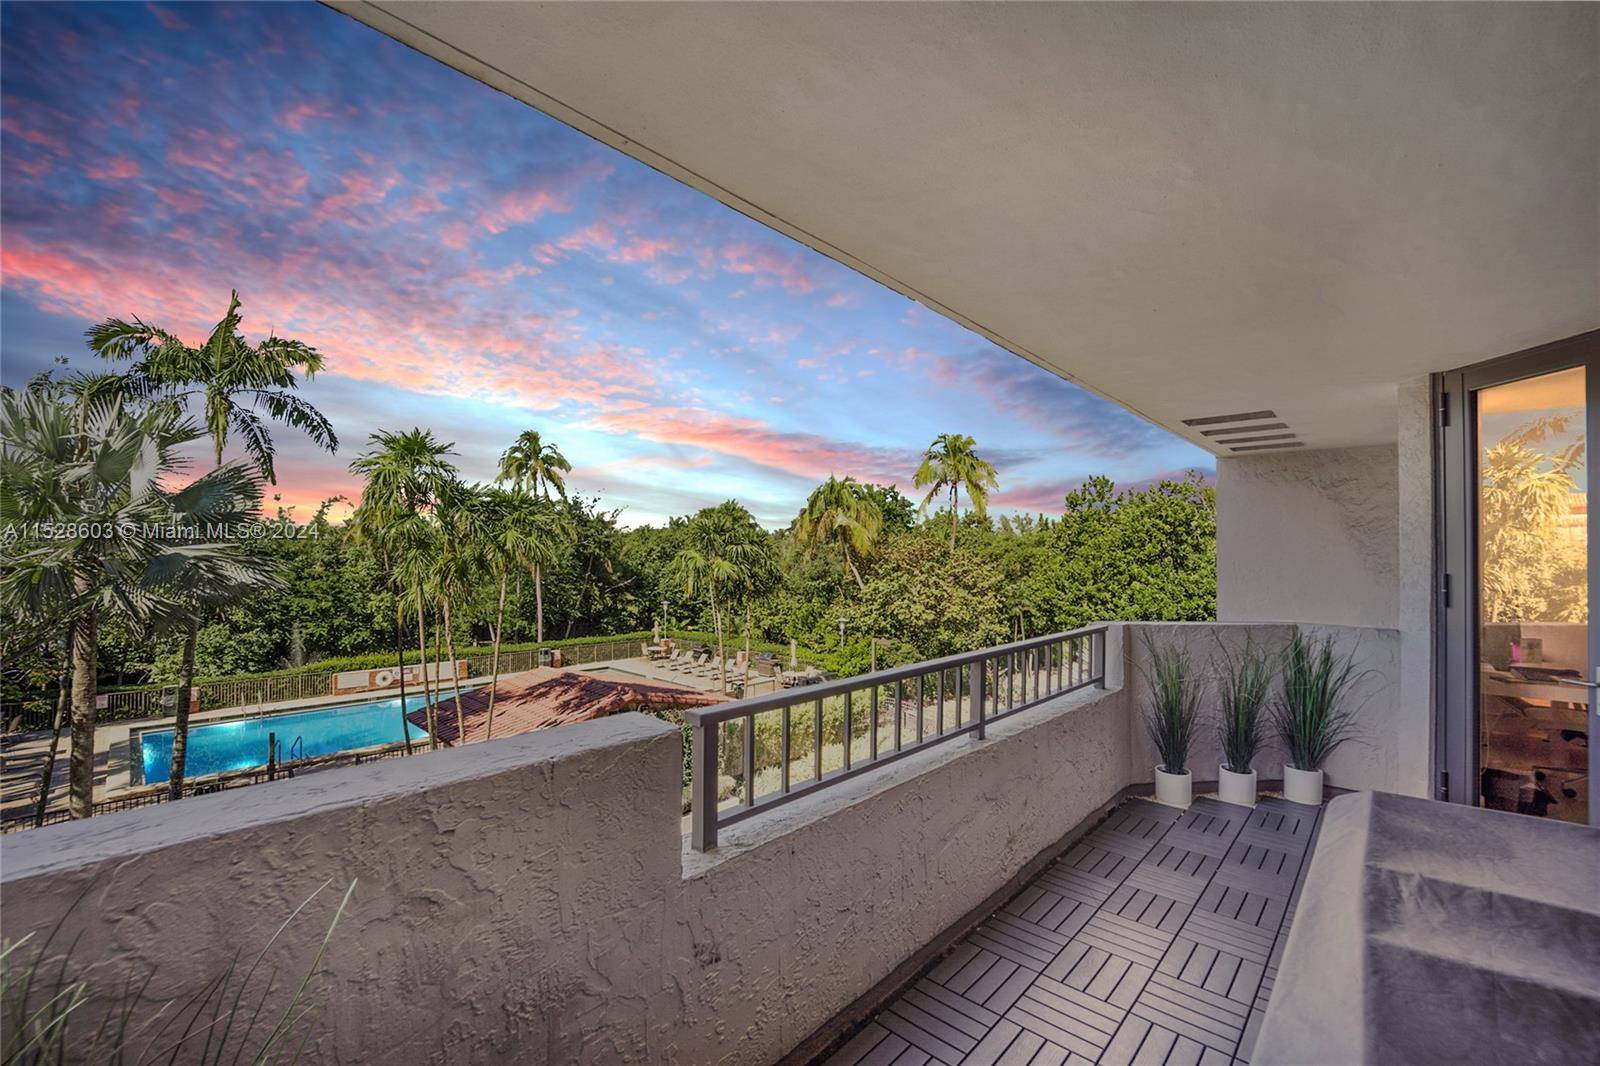 Seasonal Rental ! ! 2 bedrooms, 2 baths overlooking the pool and lush gardens of Key Colony.